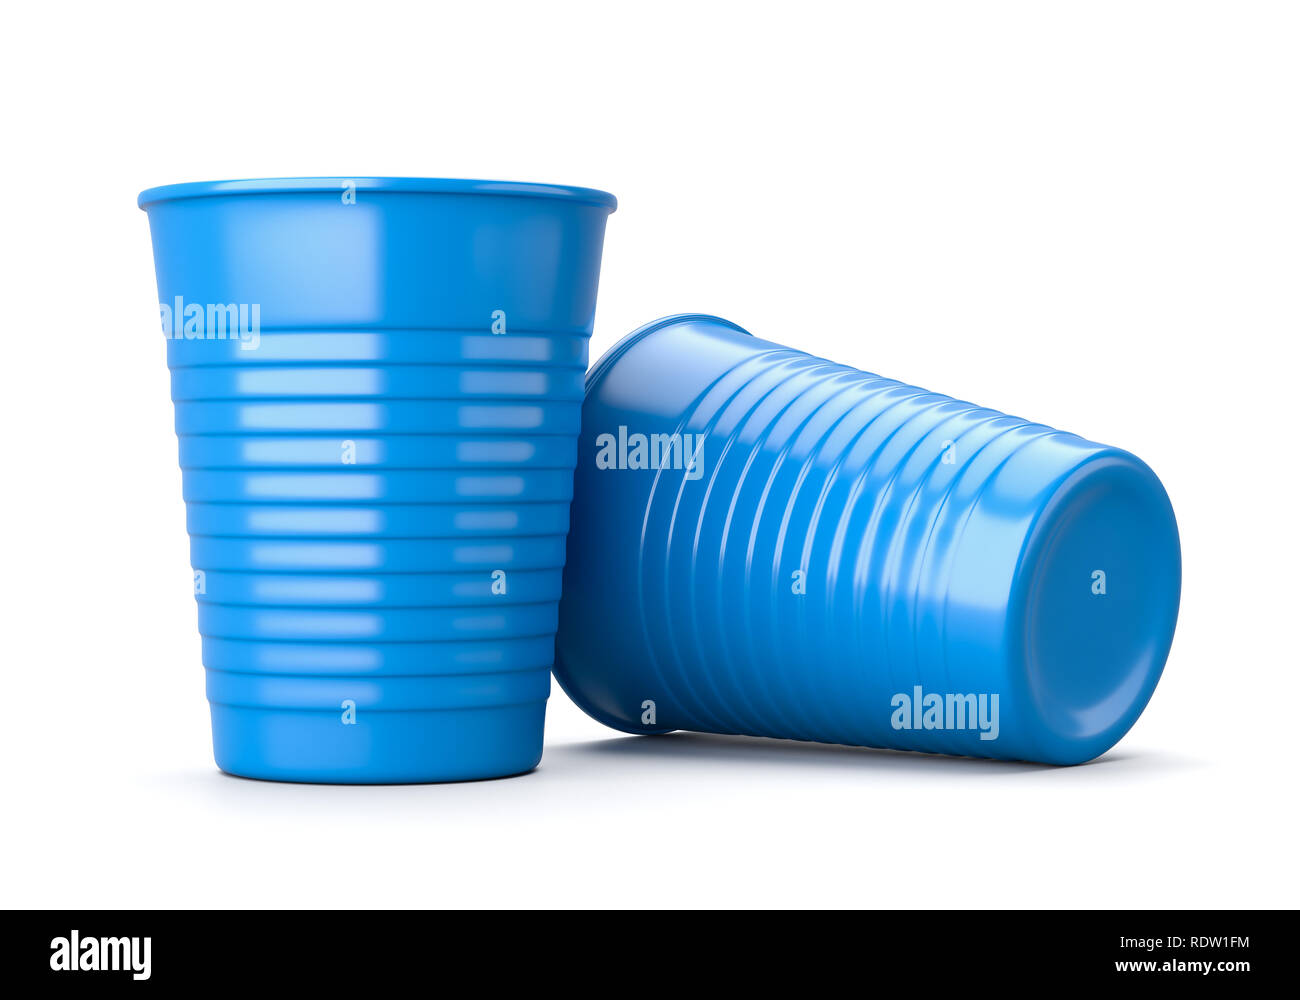 Blue Plastic Cup Isolated on White Background 3D Illustration Stock Photo